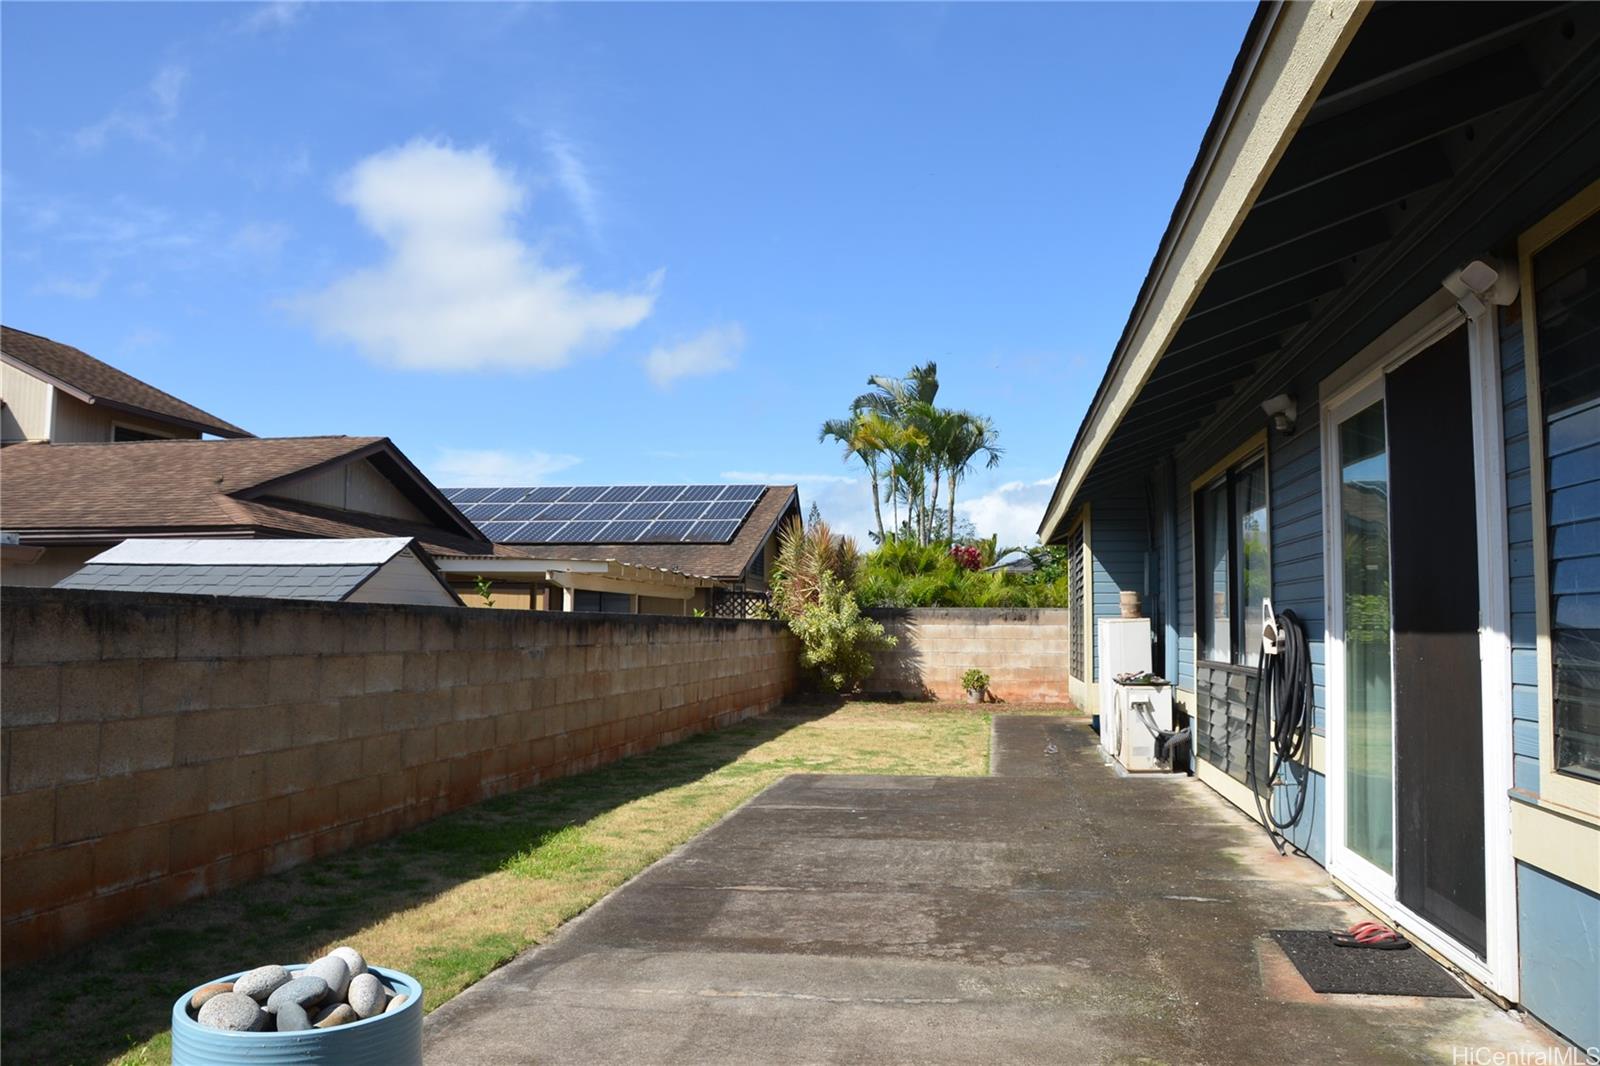 95-106  Makaholowaa Place Mililani Area, Central home - photo 2 of 2